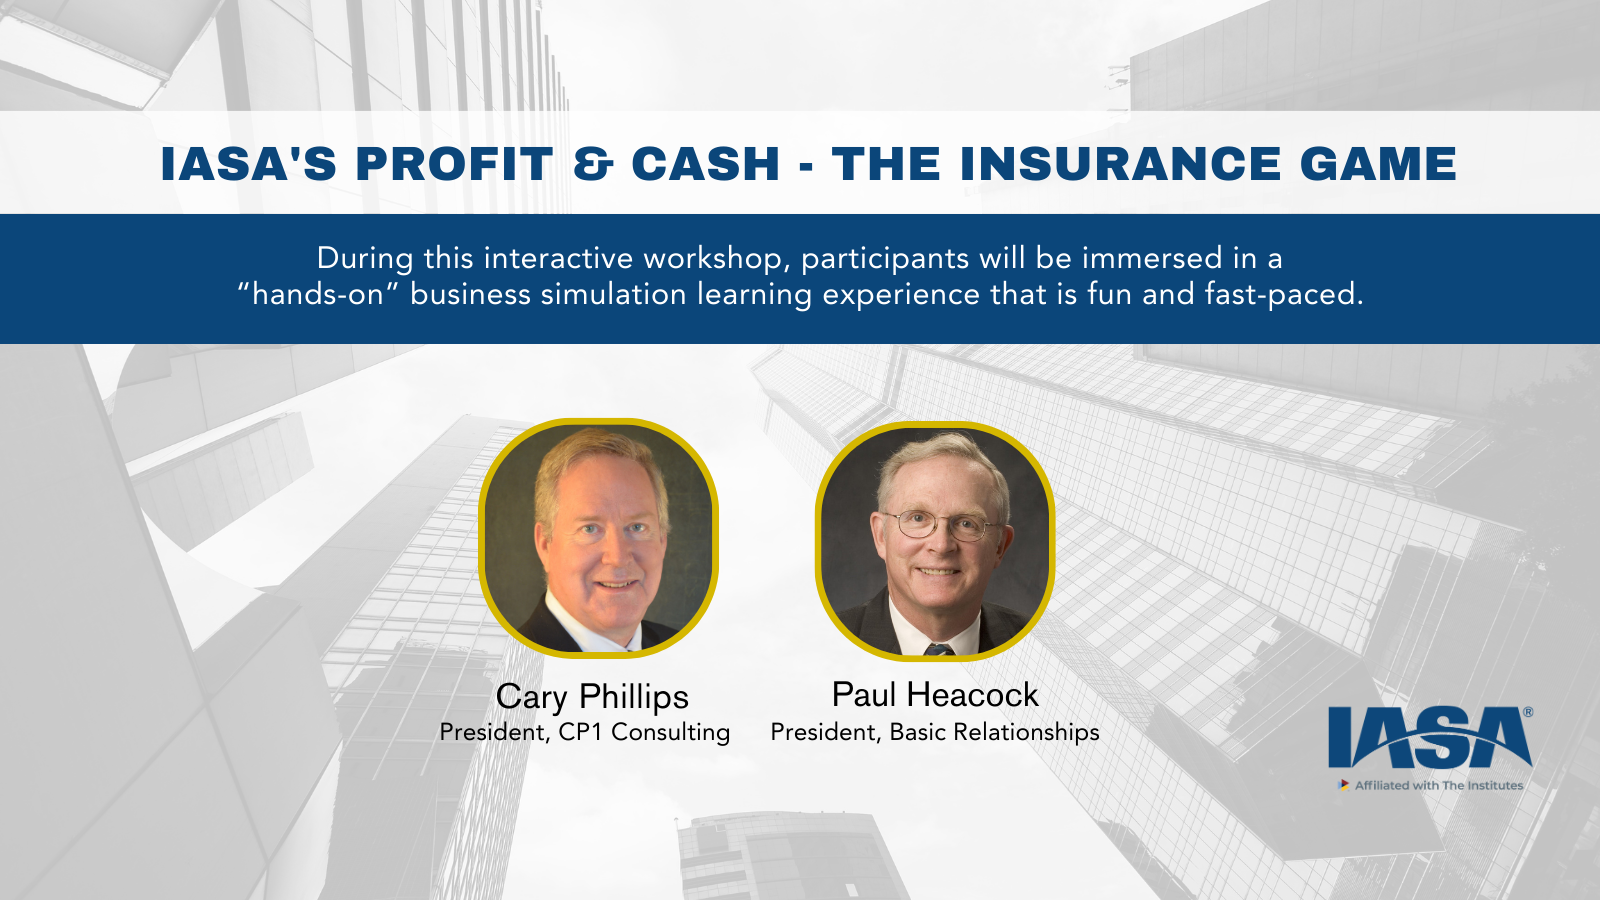 IASA’s Profit and Cash - The Insurance Game